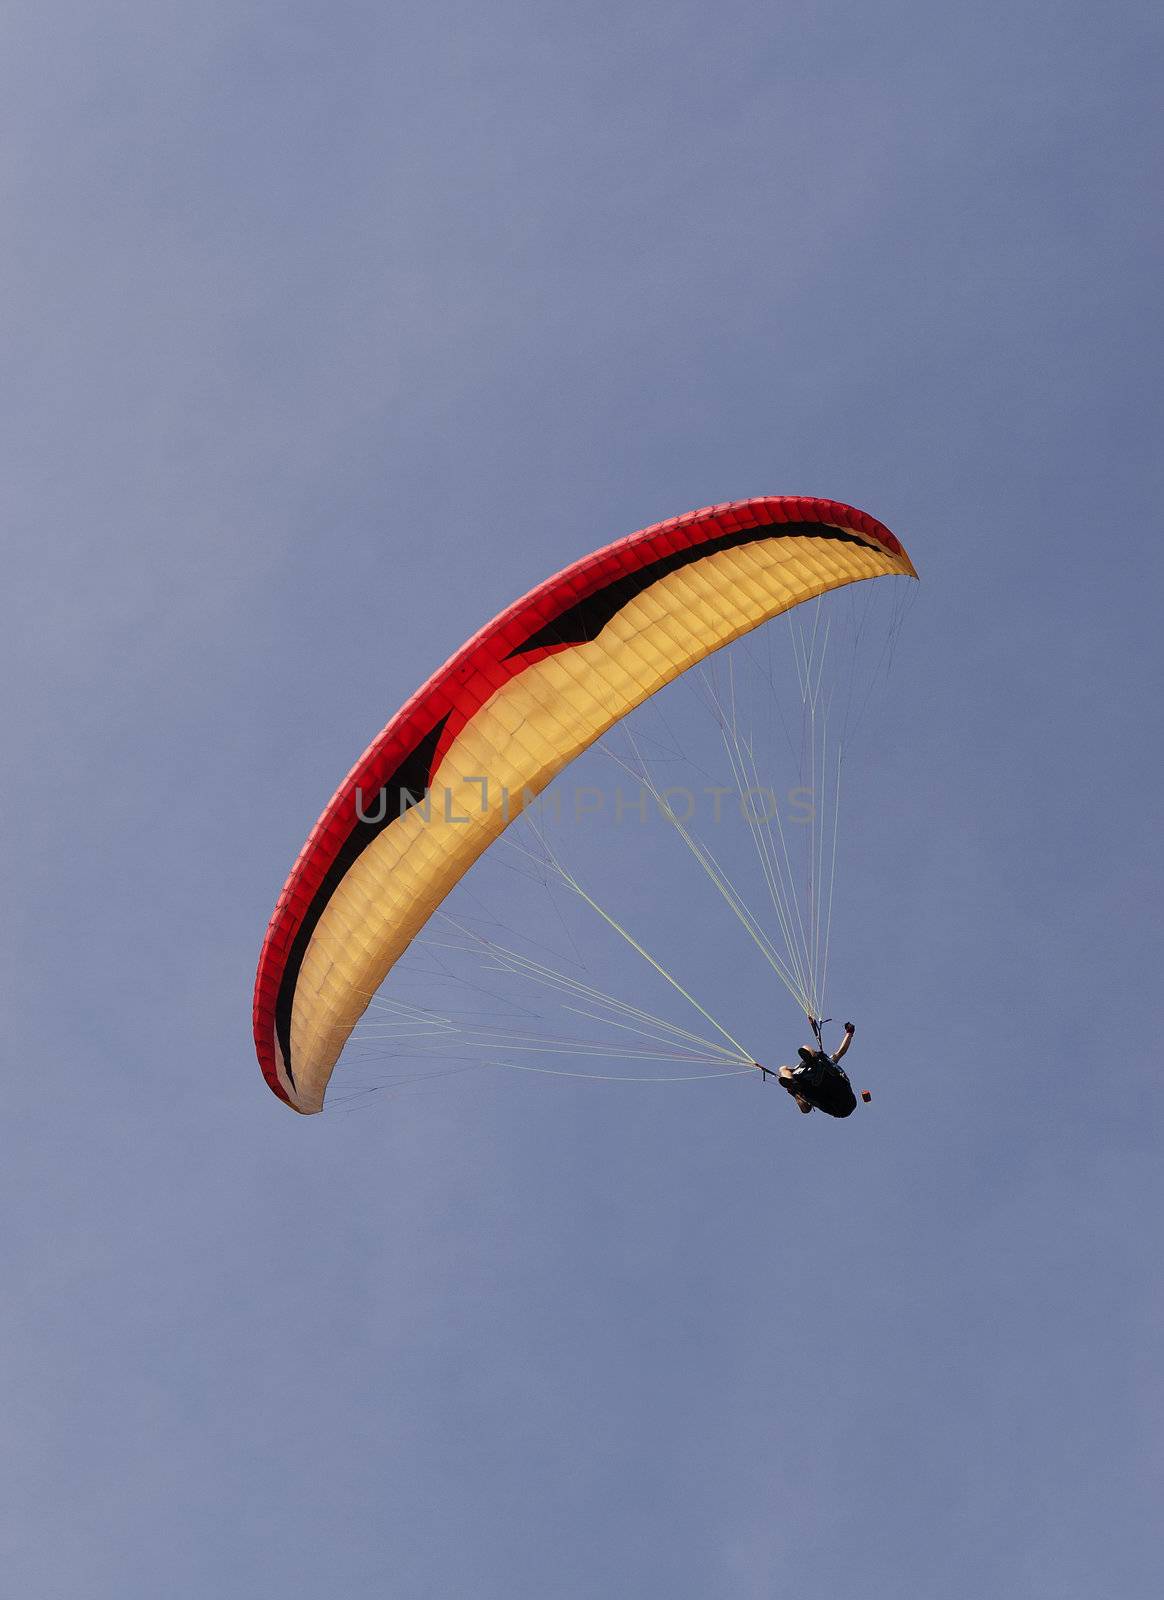 Red, yellow and black para glider against a blue sky.